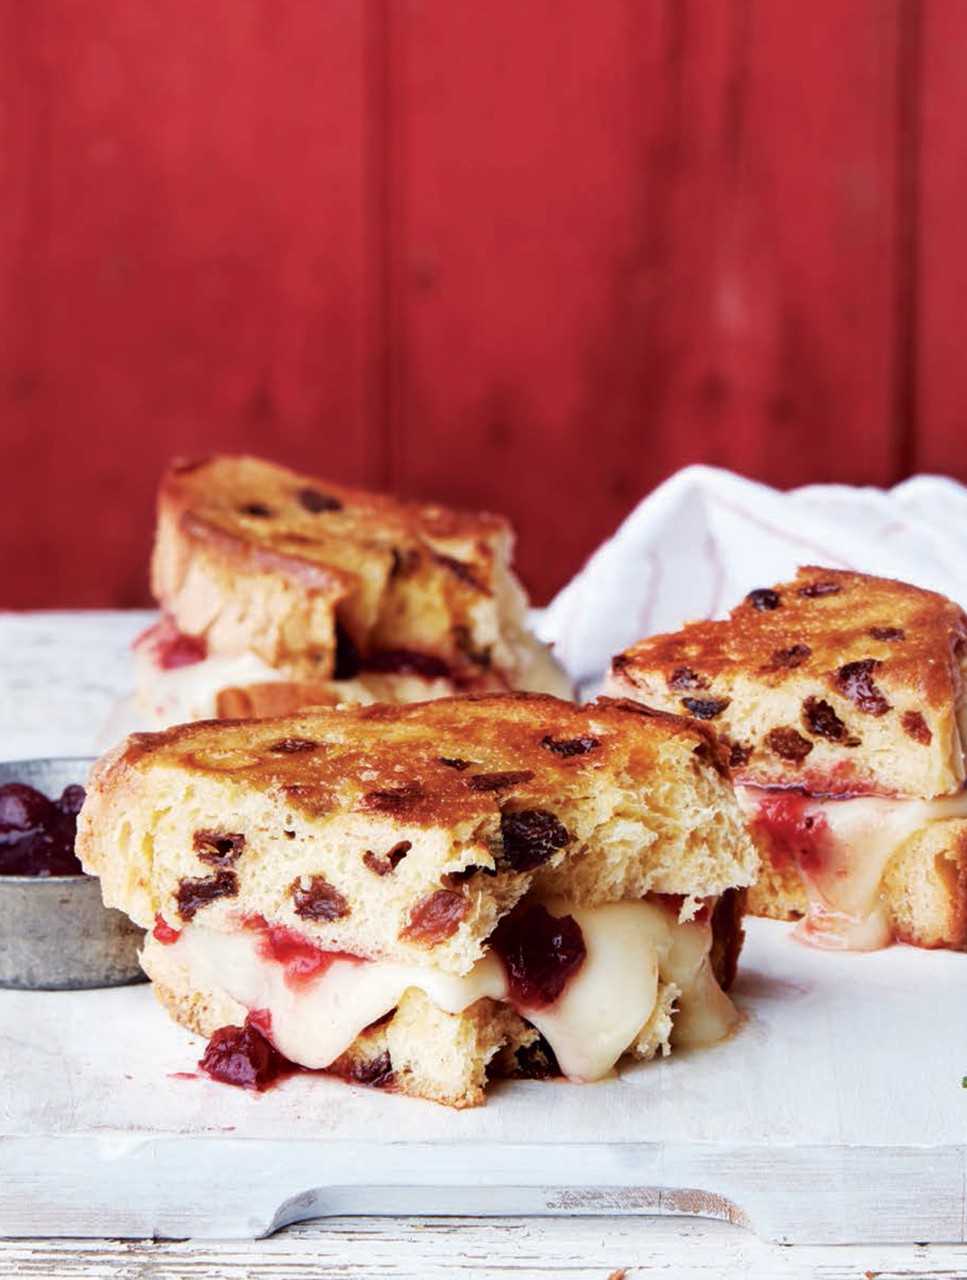 Grilled Brie & Panettone Sandwiches with Spicy Cranberry Sauce